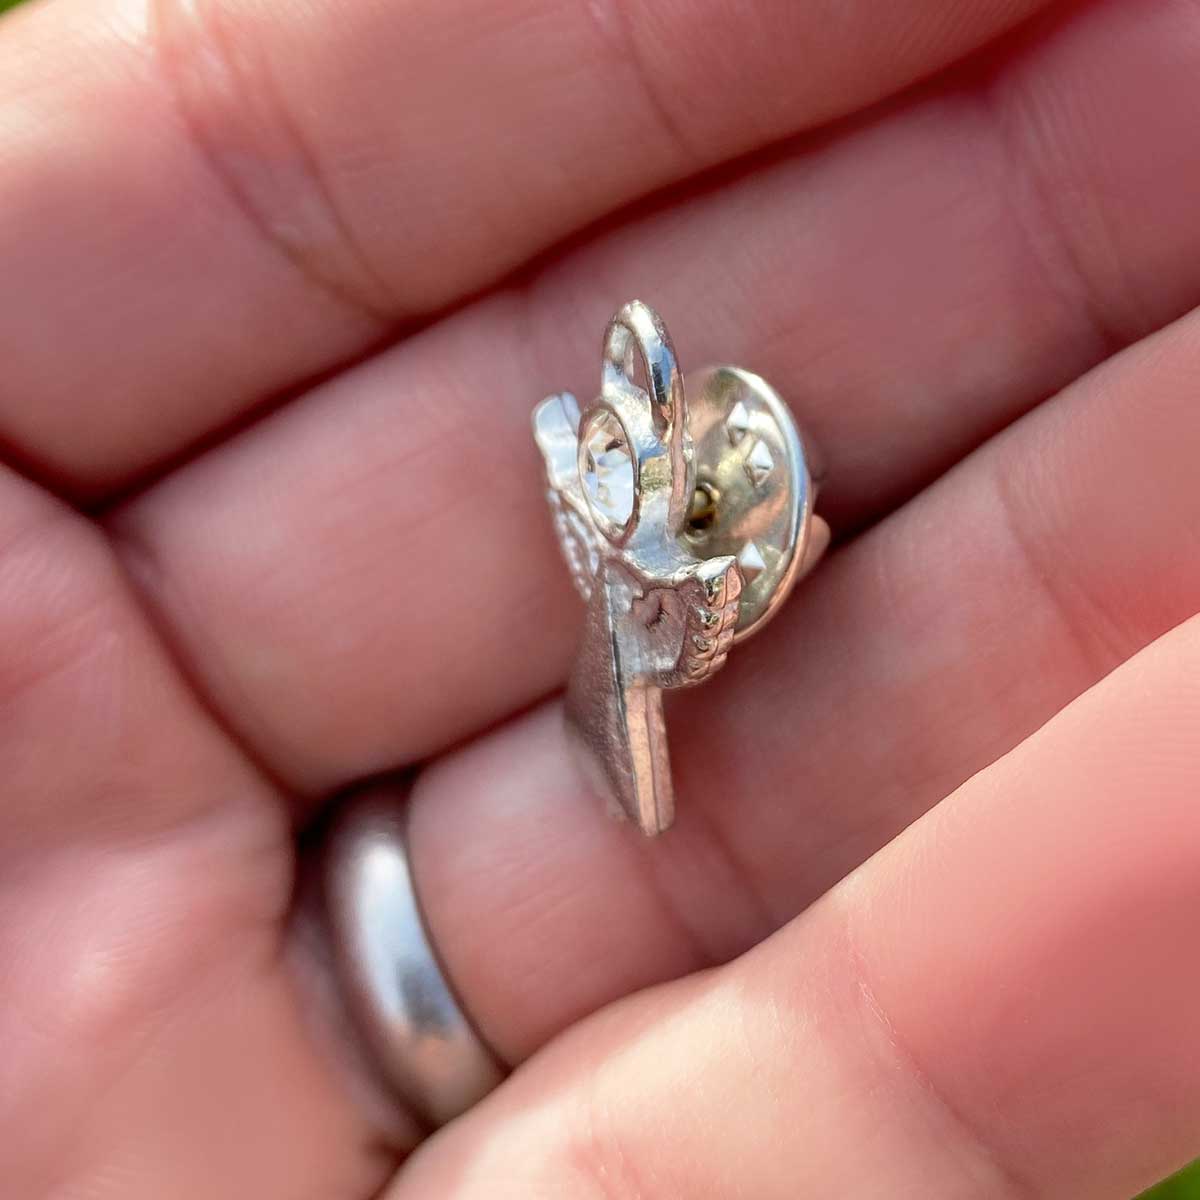 'A Moment in my Arms' Angel Pin